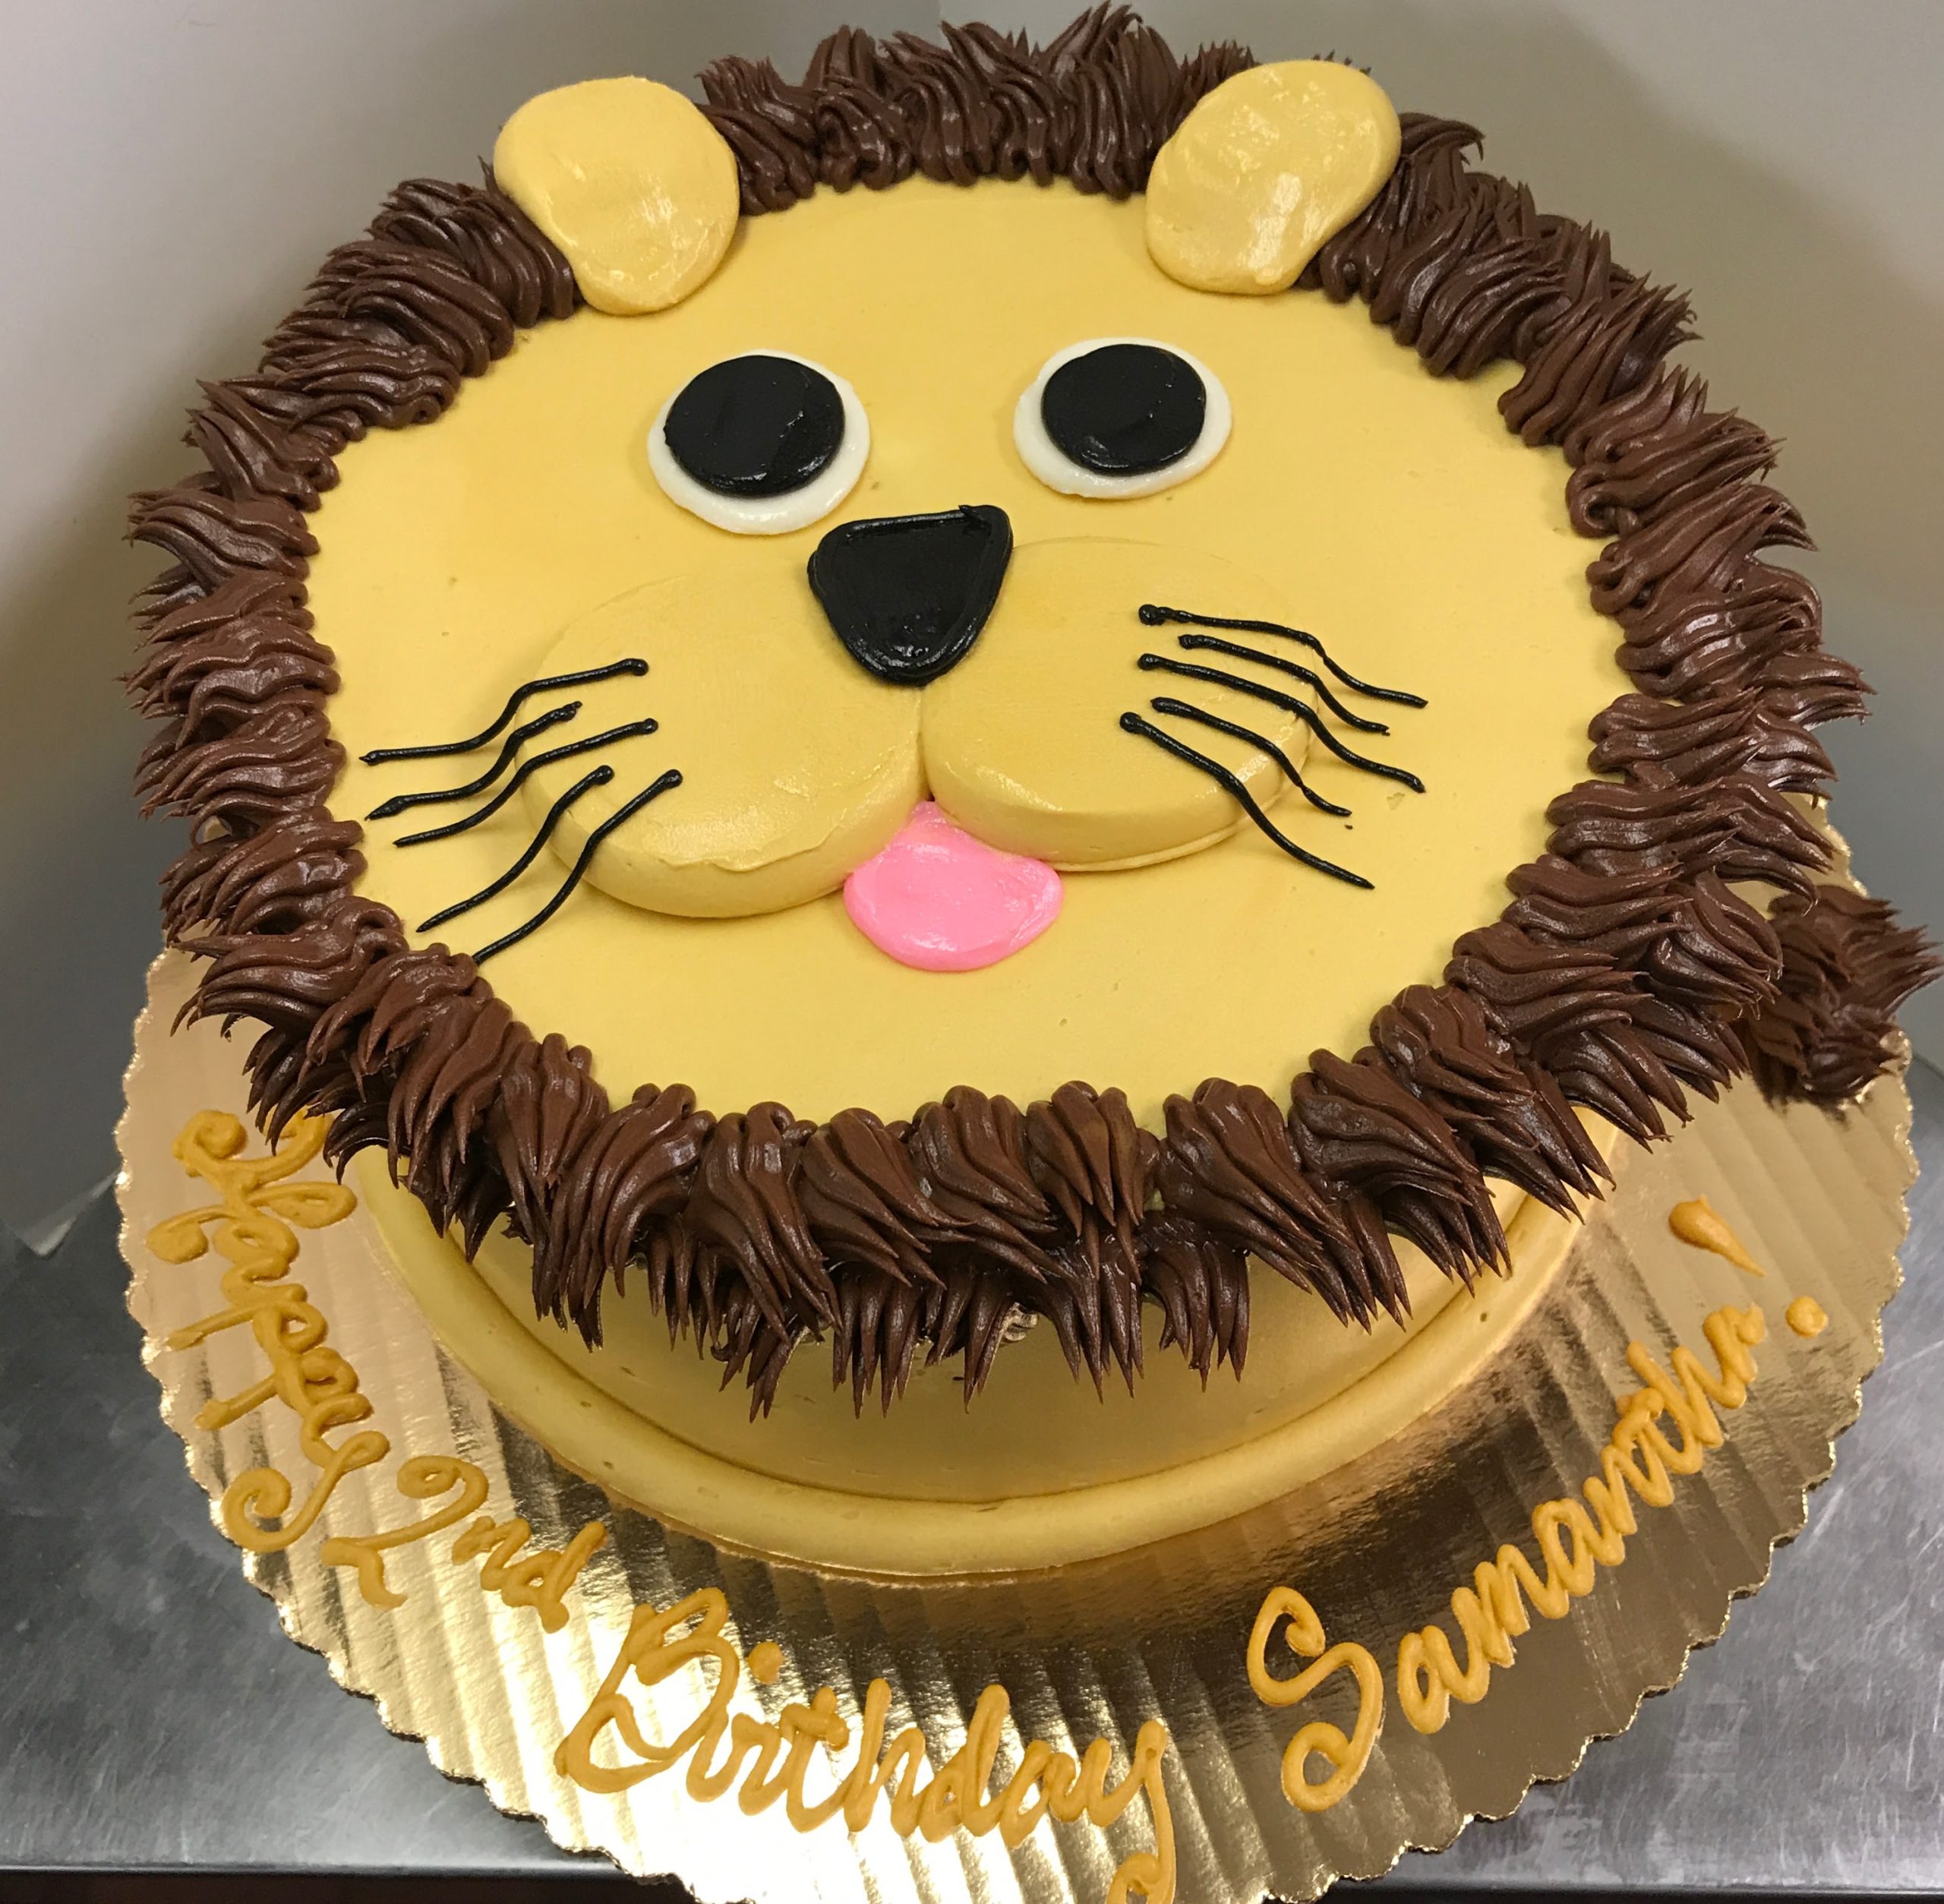 CUTE FULL COVER LION WITH FUZZY MANE AND WHISKERS FOR KIDS BIRTHDAY PARTY CELELBRATION BABY SHOWER CUSTOM CAKE IN CHICAGO